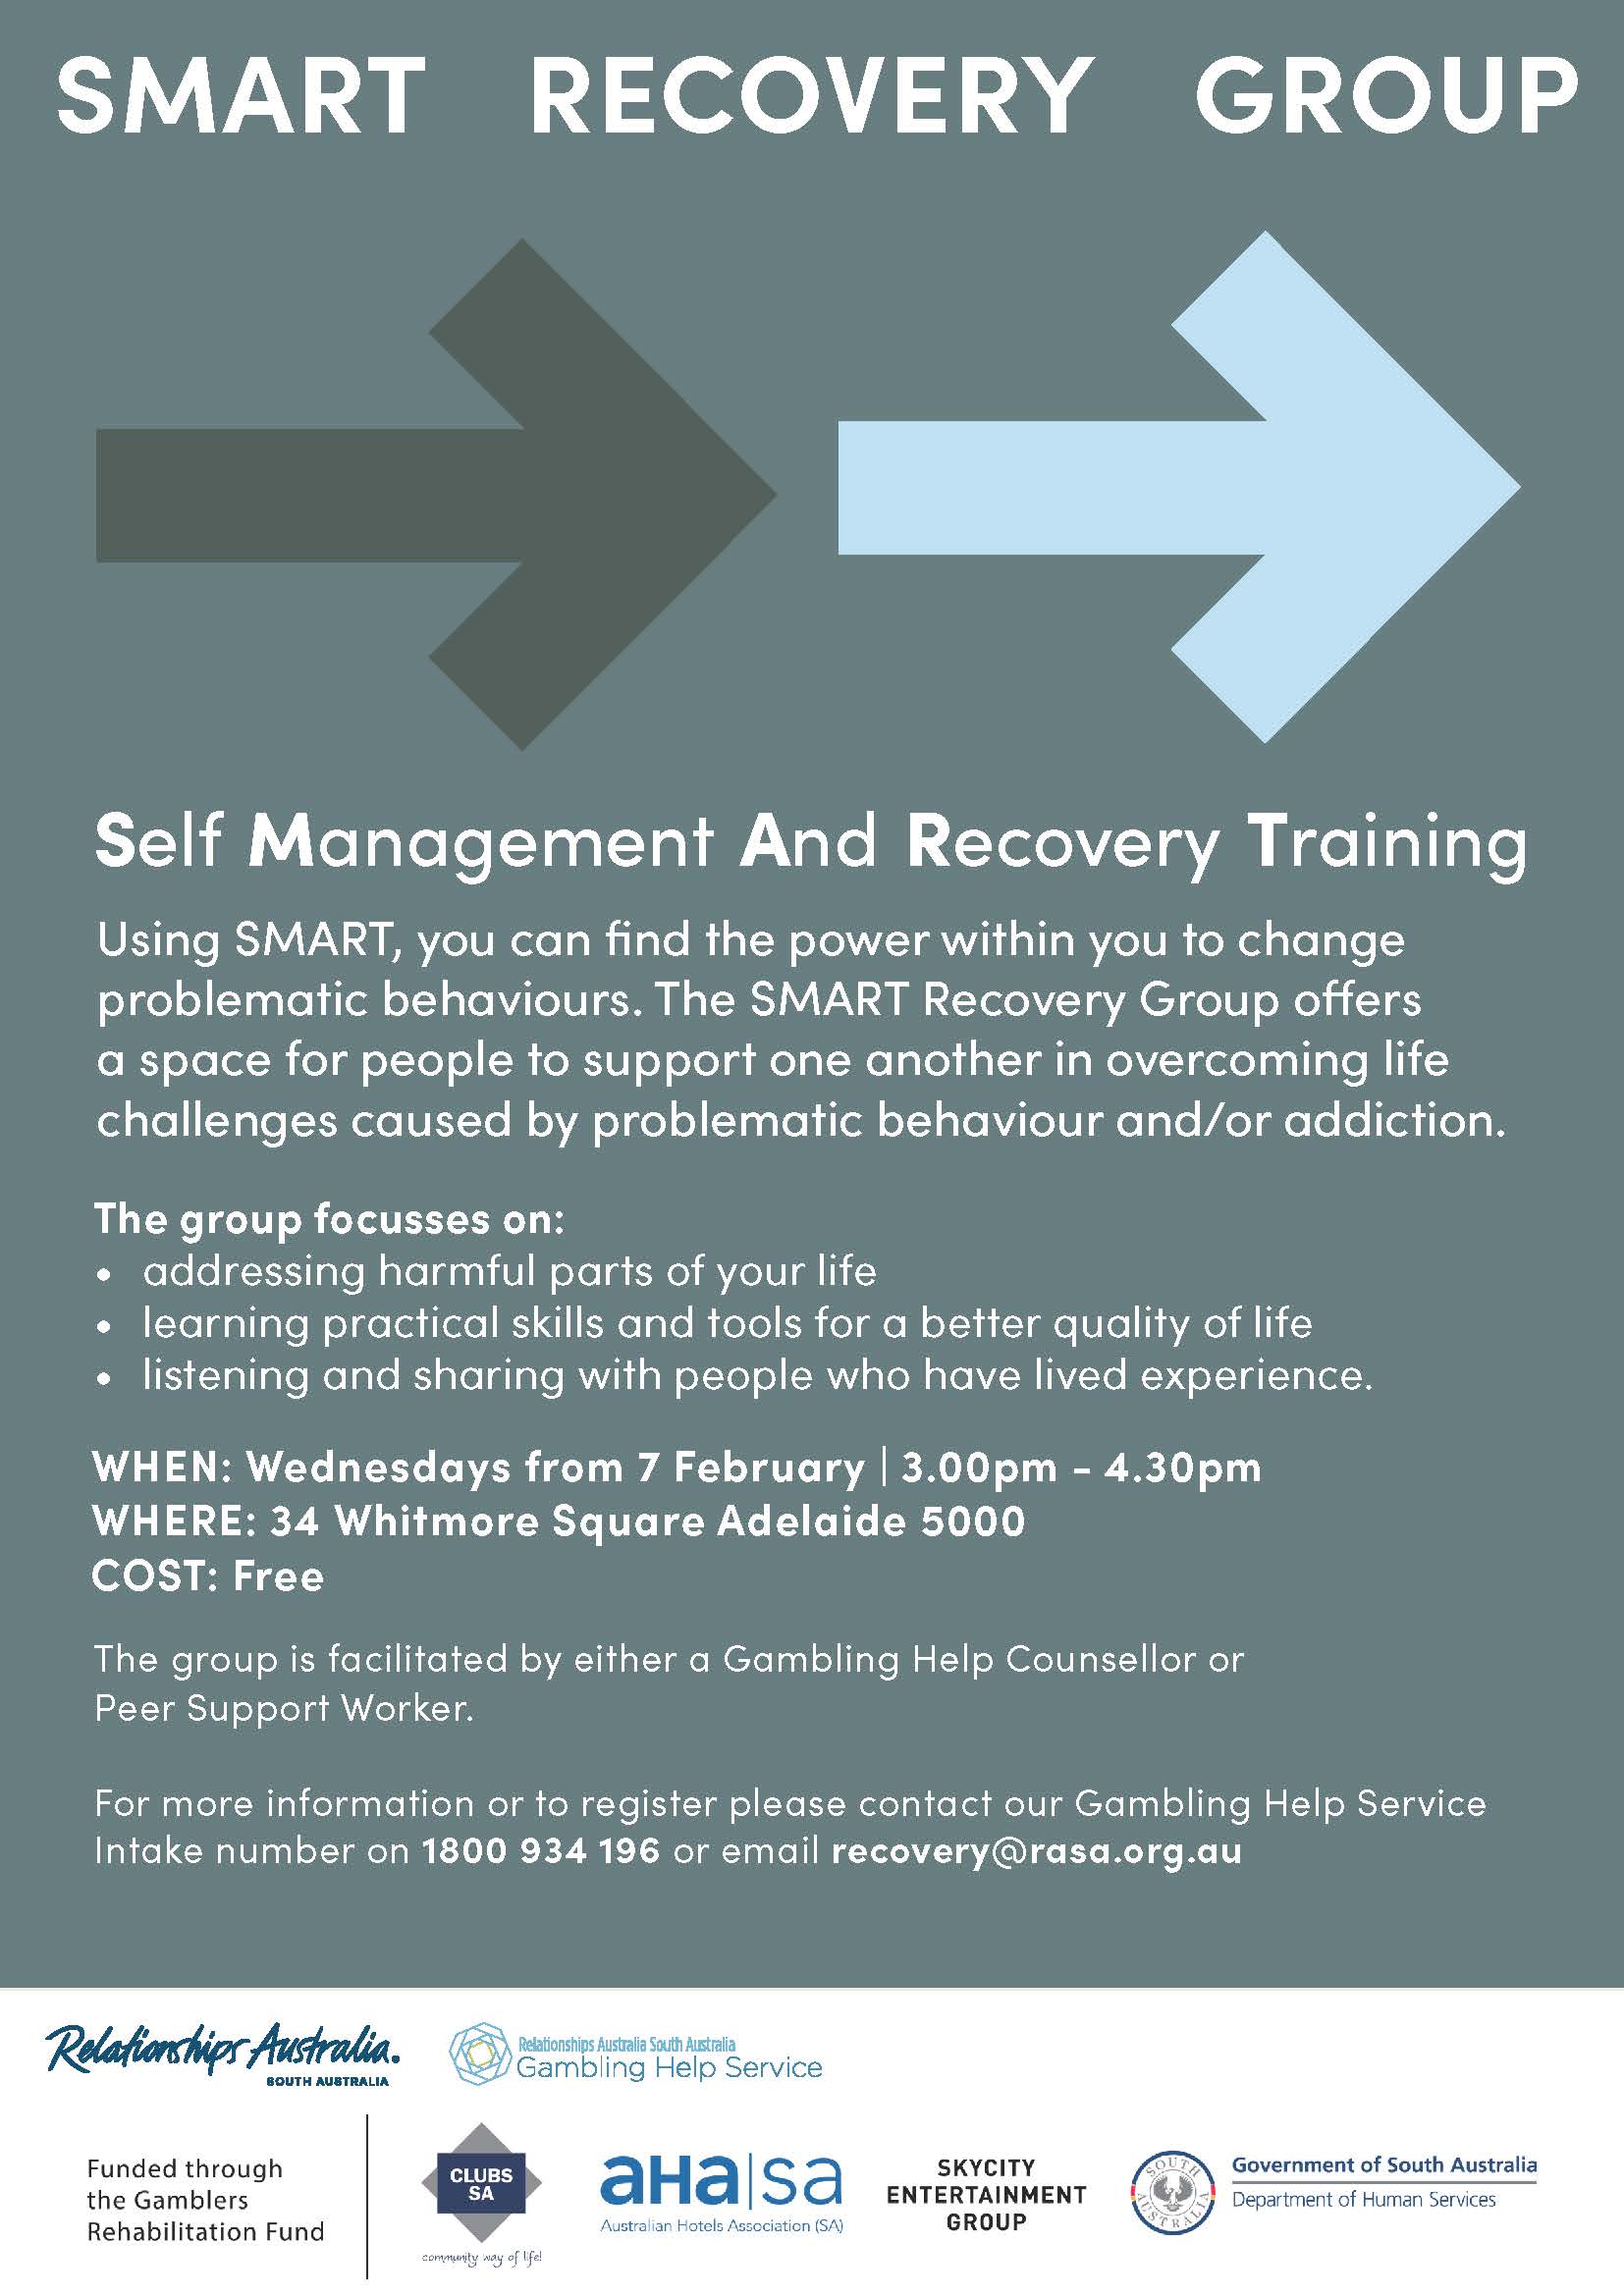 SMART Recovery (Self Management and Recovery Training).